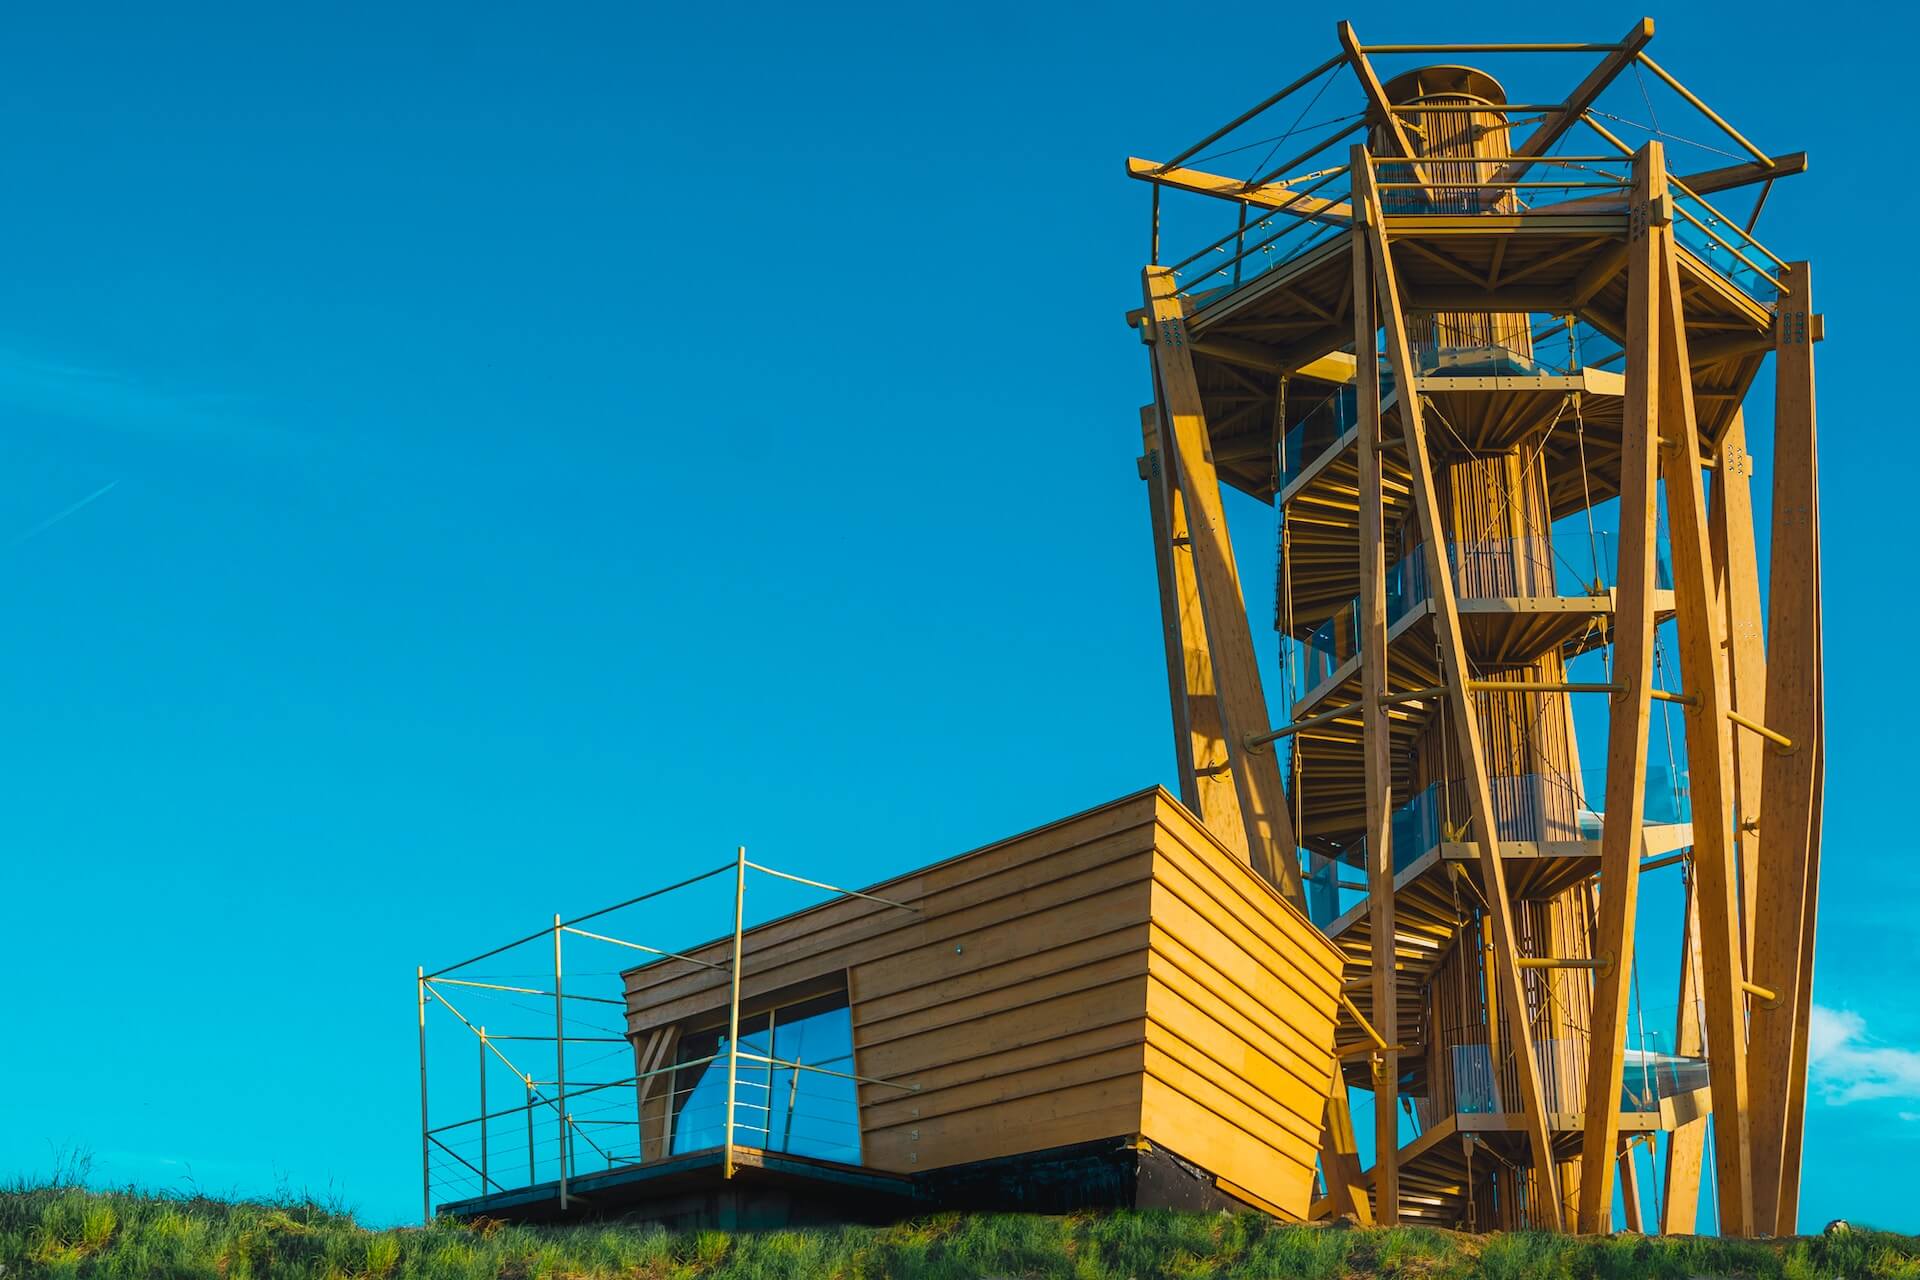 Wildfire lookout tower